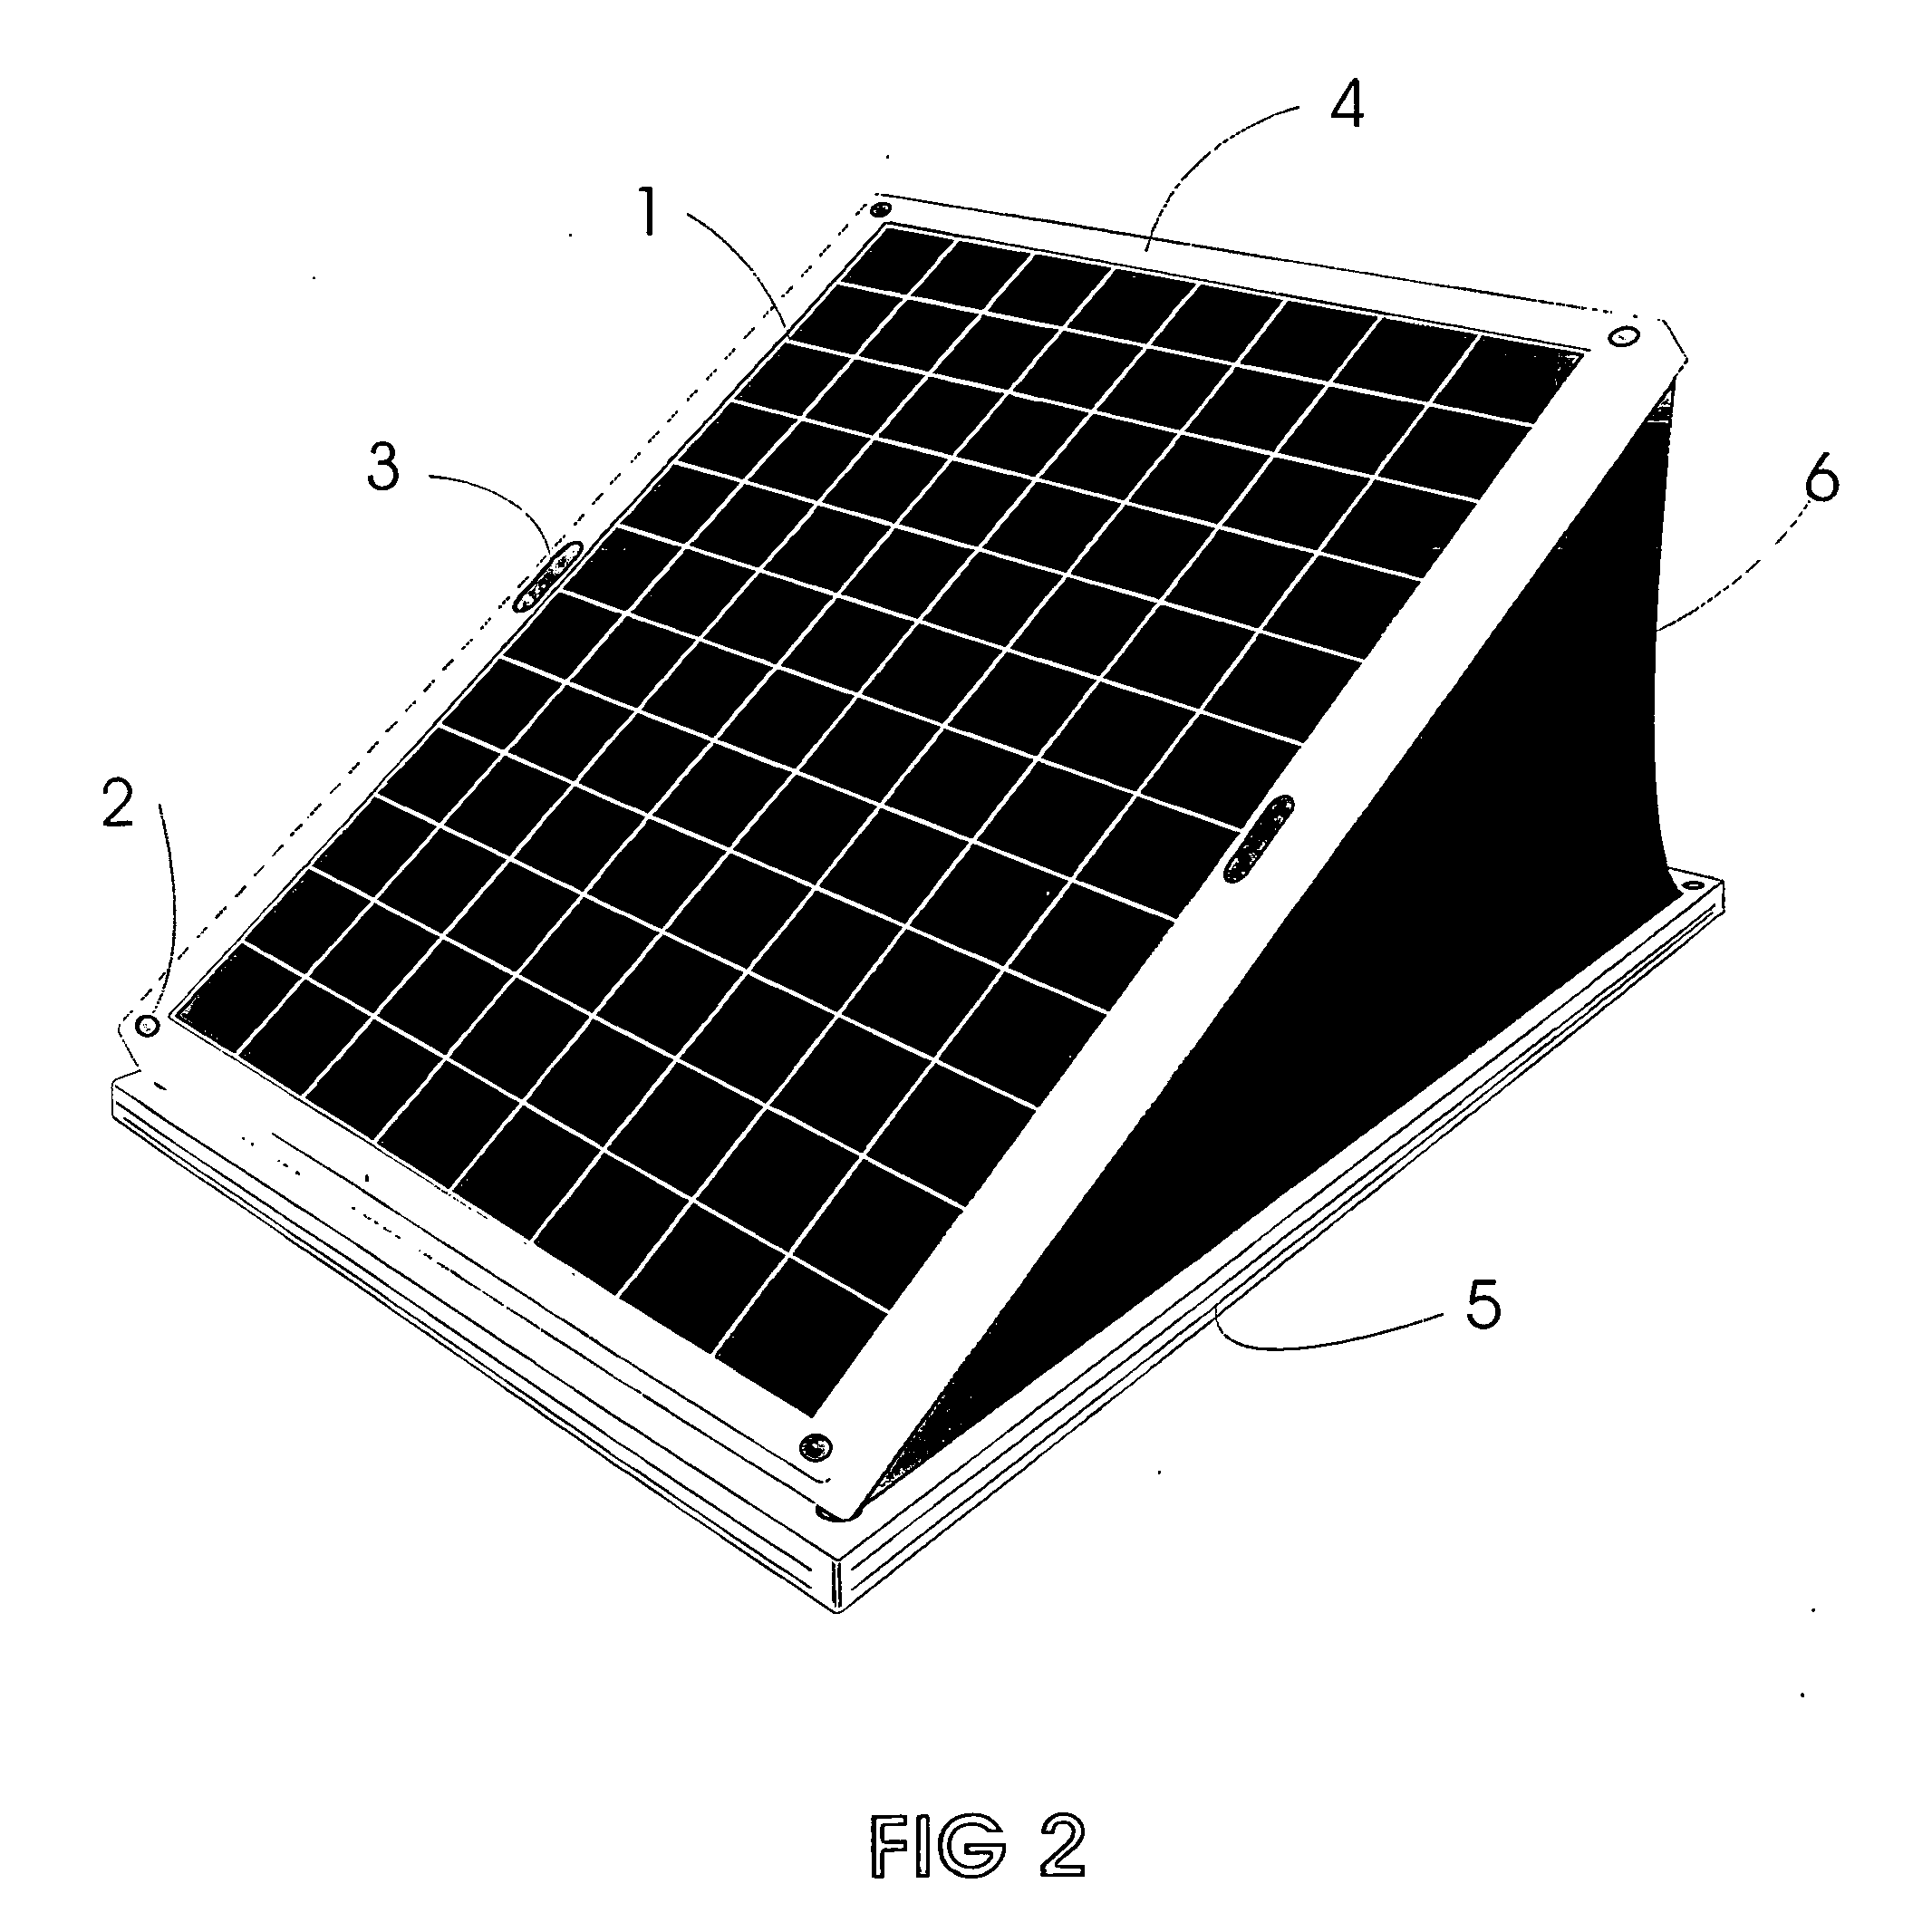 Smart modular automated multi axis case for solar modules, panels, electronic displays, sensors, and the like